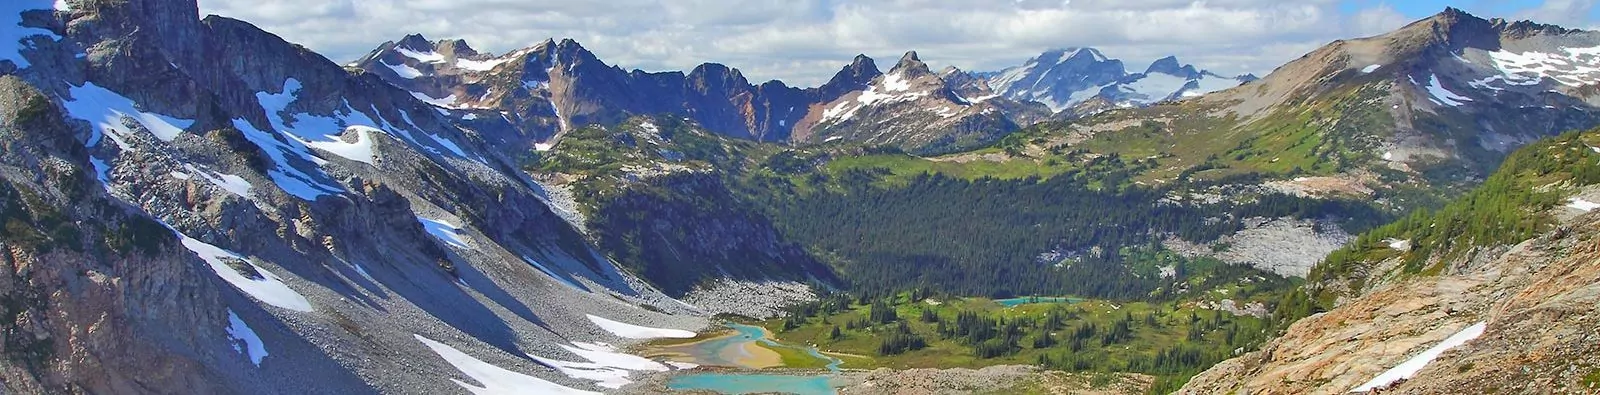 Wide image of alpine lakes and glaciers of North Cascades National Park